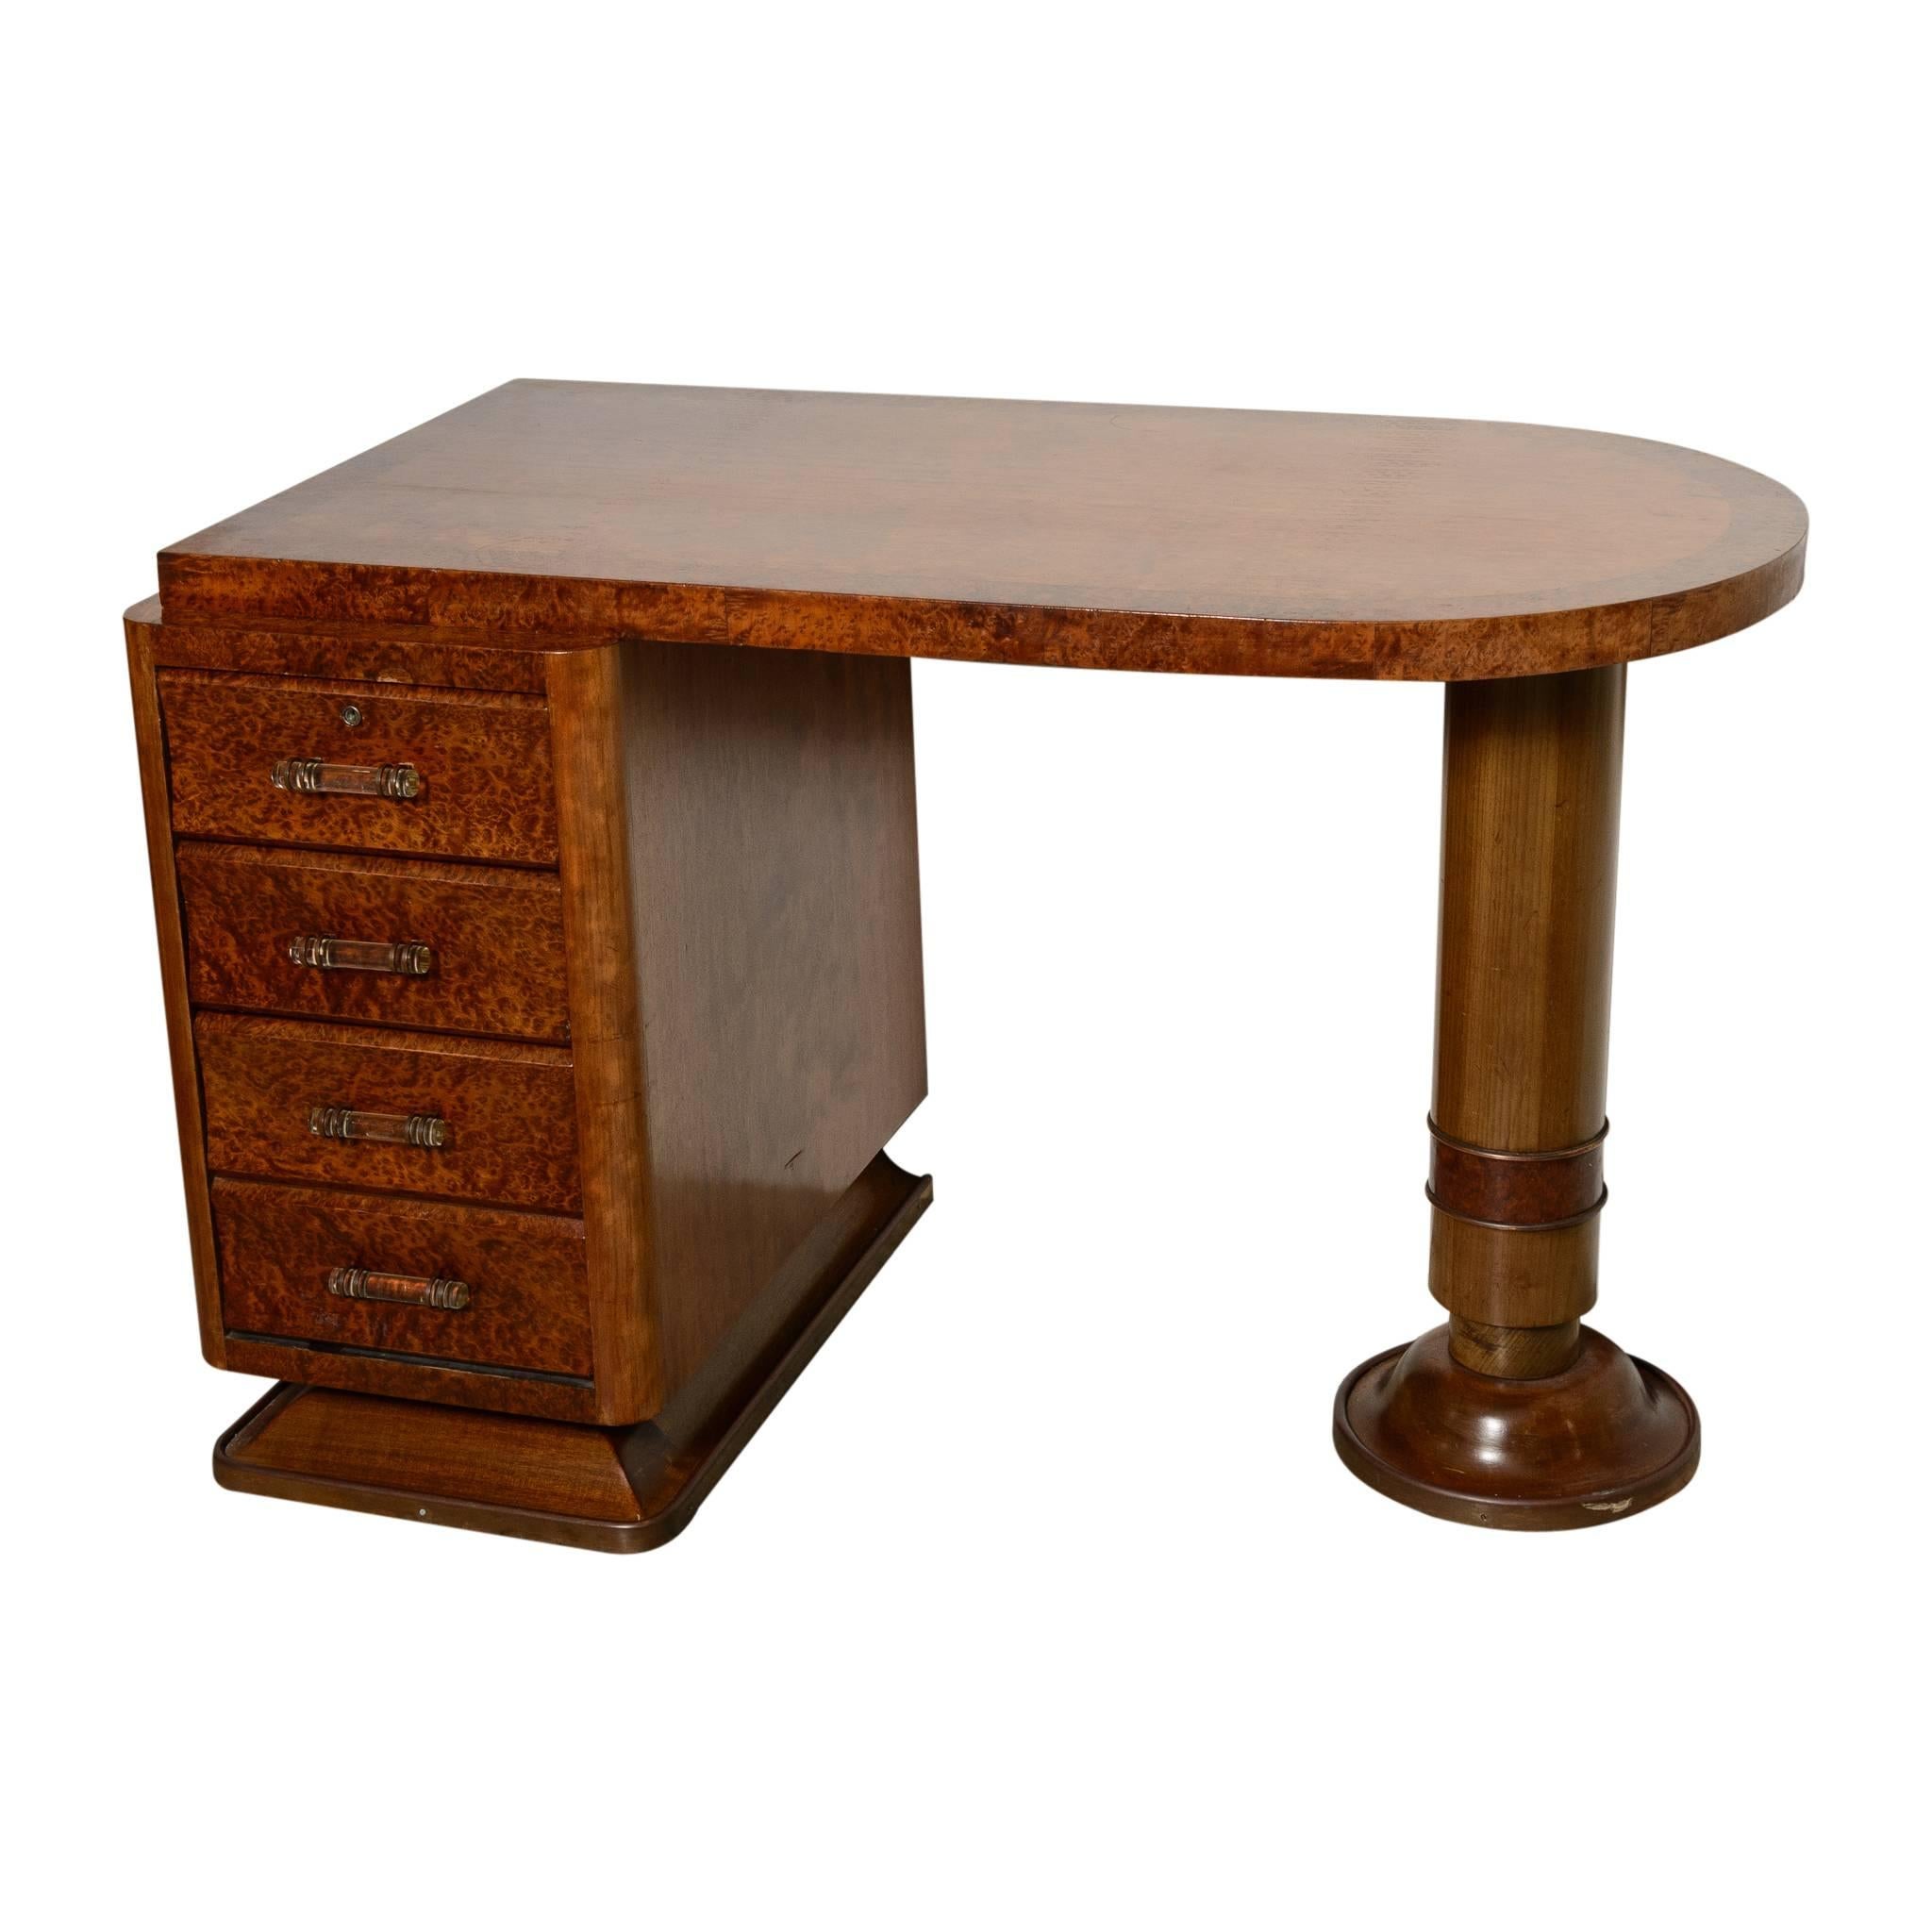 French Art Deco Four-Drawer Pedestal Desk in Ribbon Mahogany and Burl Wood